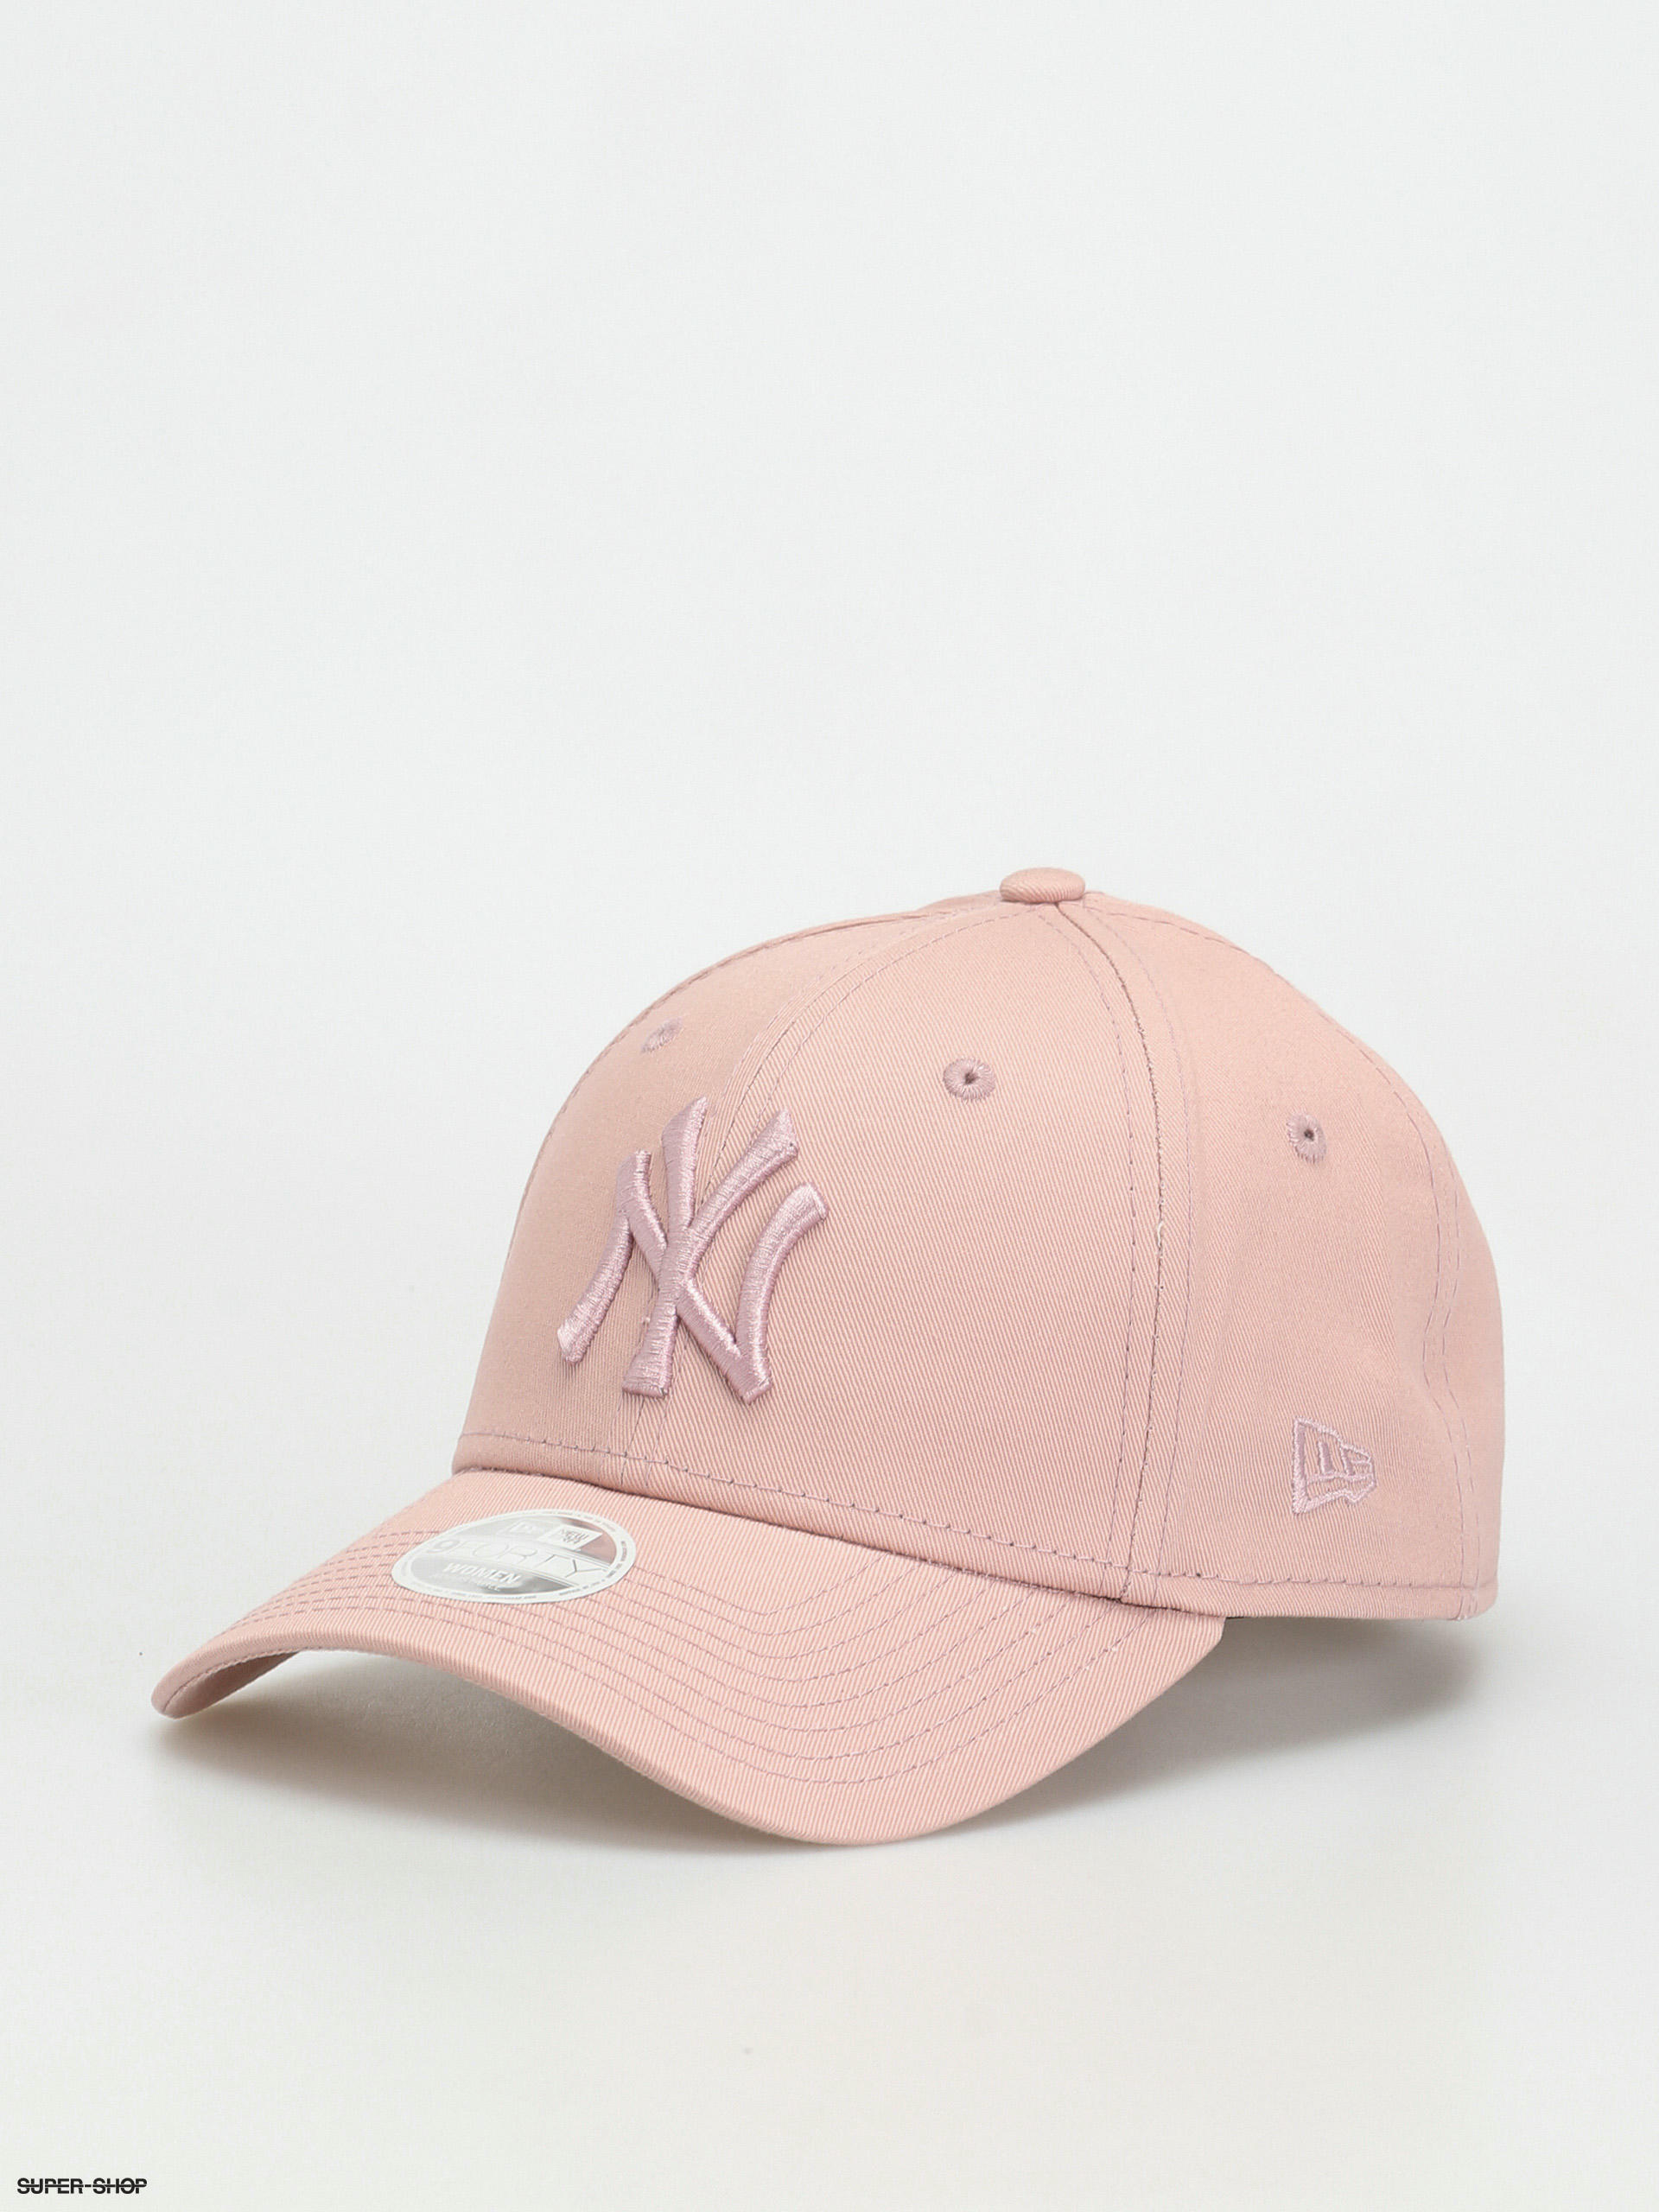 Official New Era New York Yankees Jersey Essential 9FORTY Women's